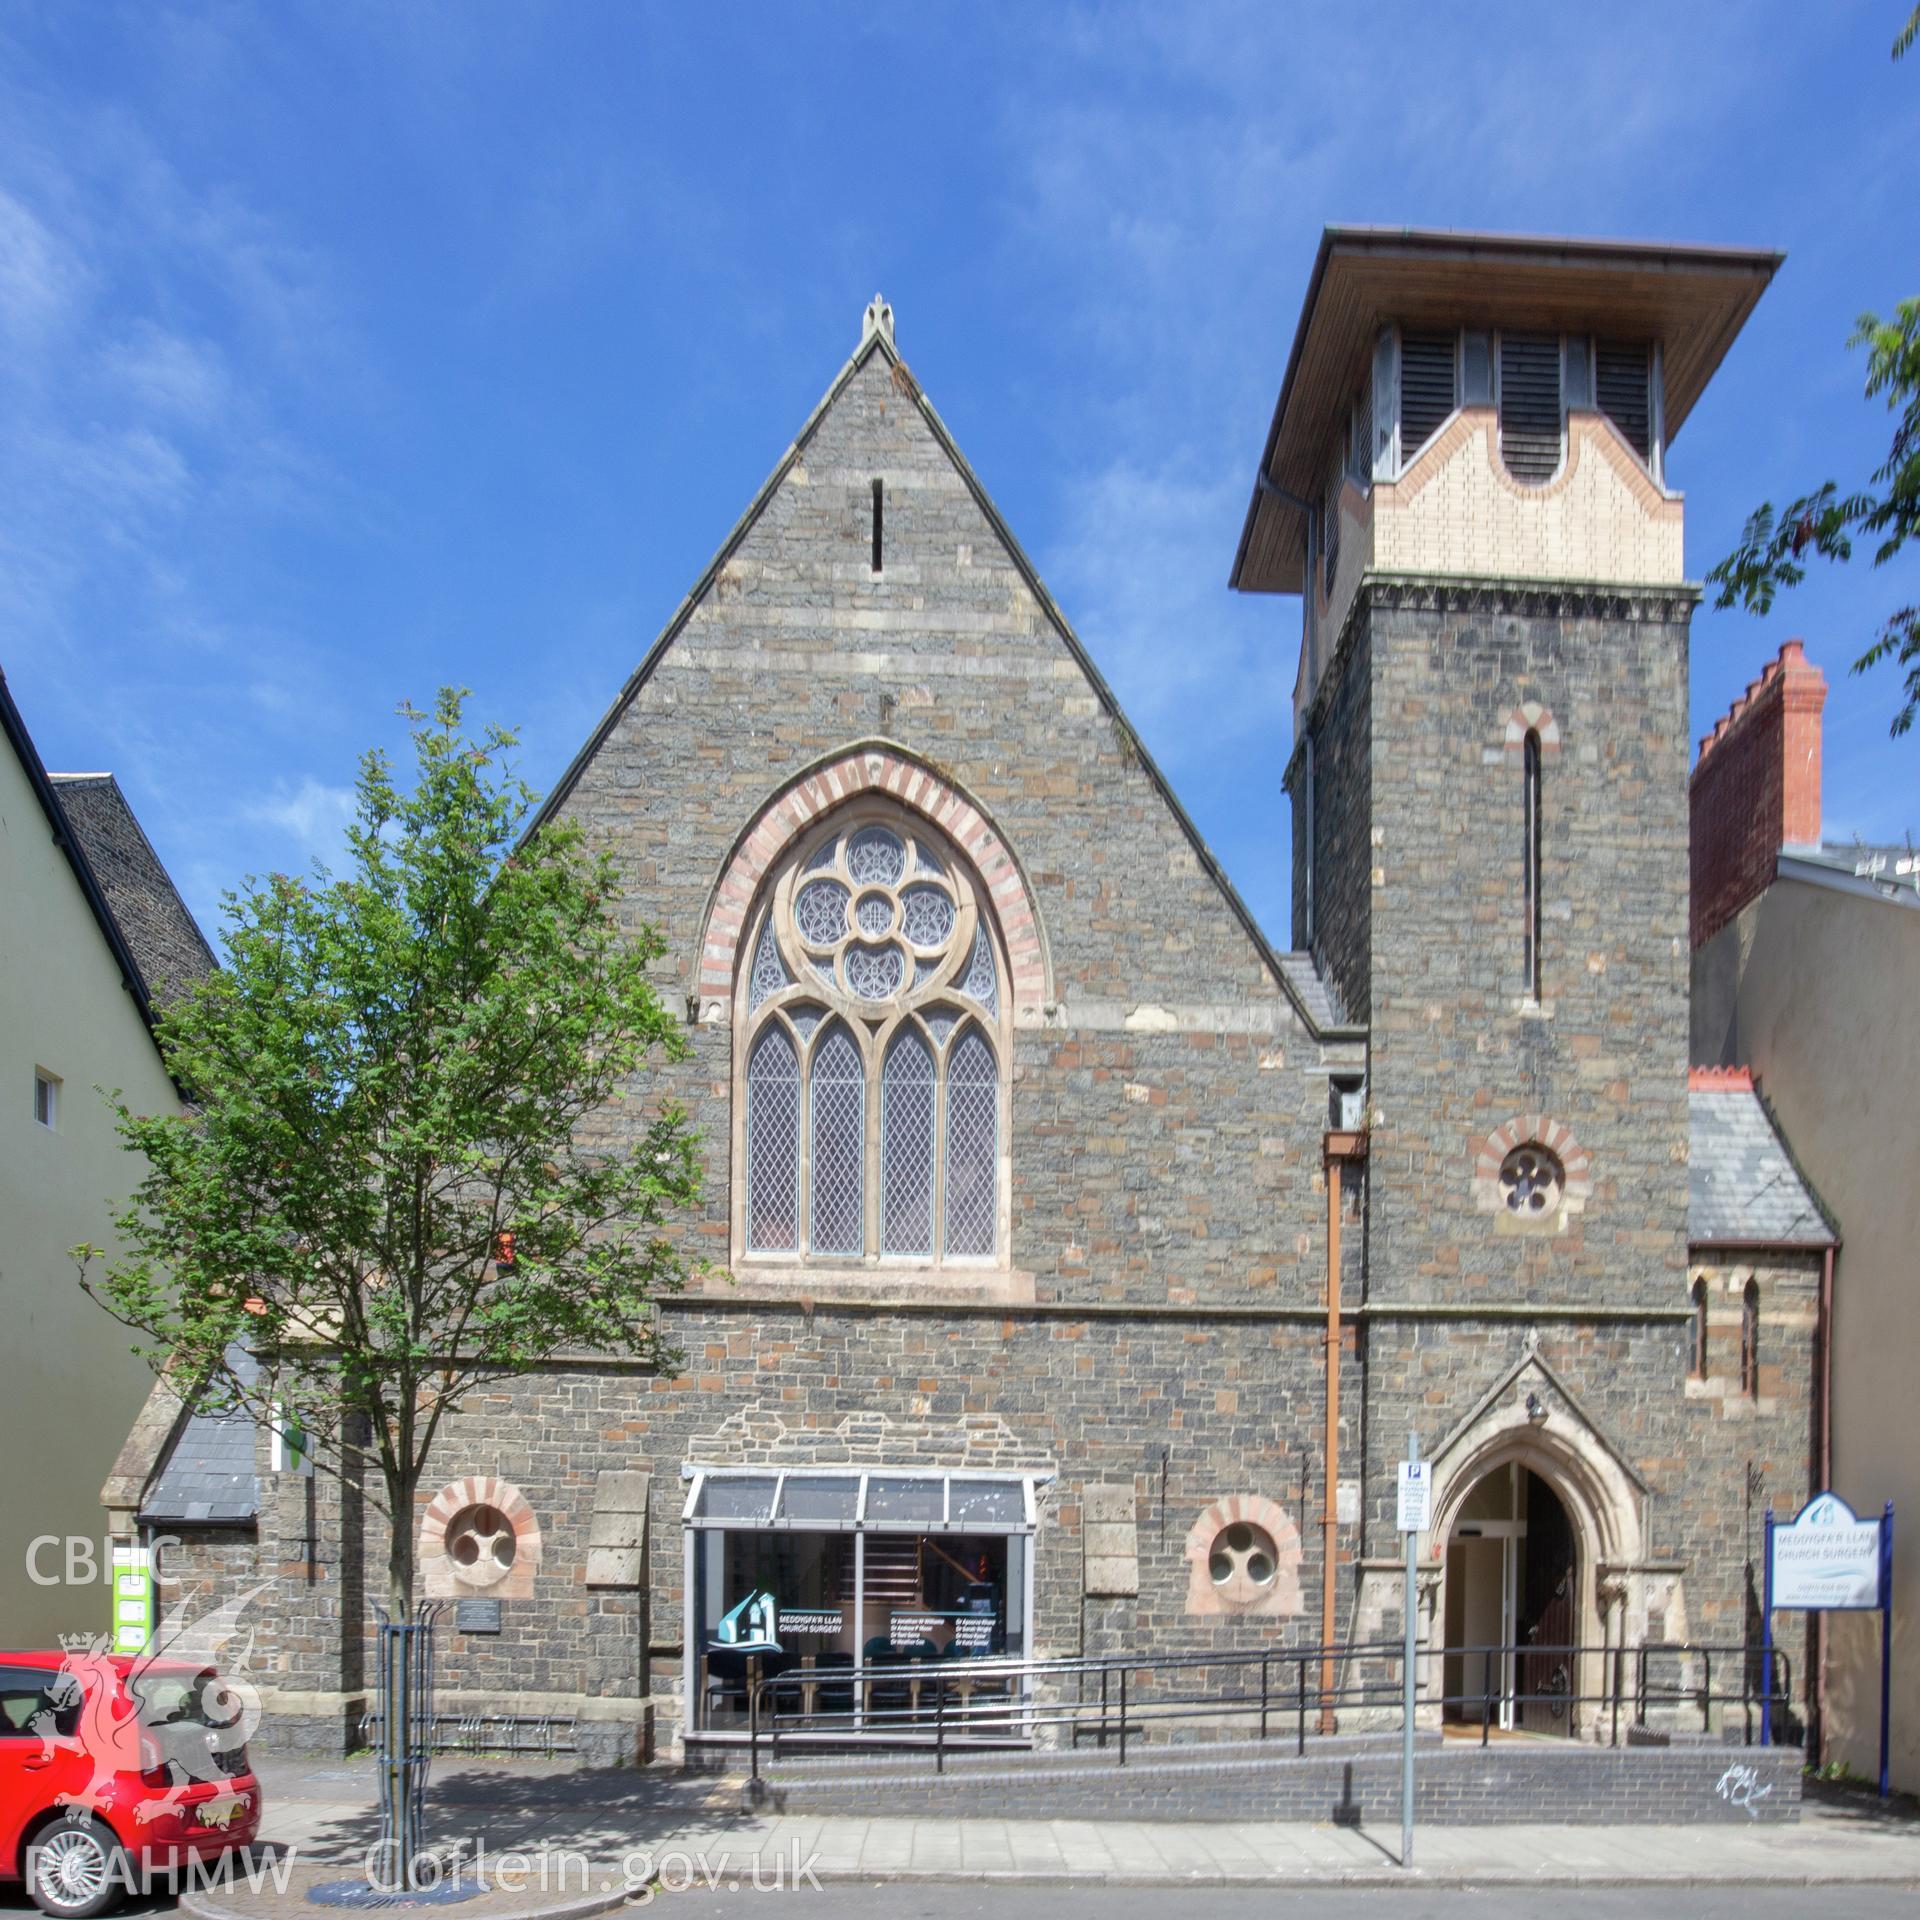 Colour photograph showing front elevation and entrance of Portland Street English Congregational Church (now surgery), Aberystwyth. Photographed by Richard Barrett on 25th June 2018.